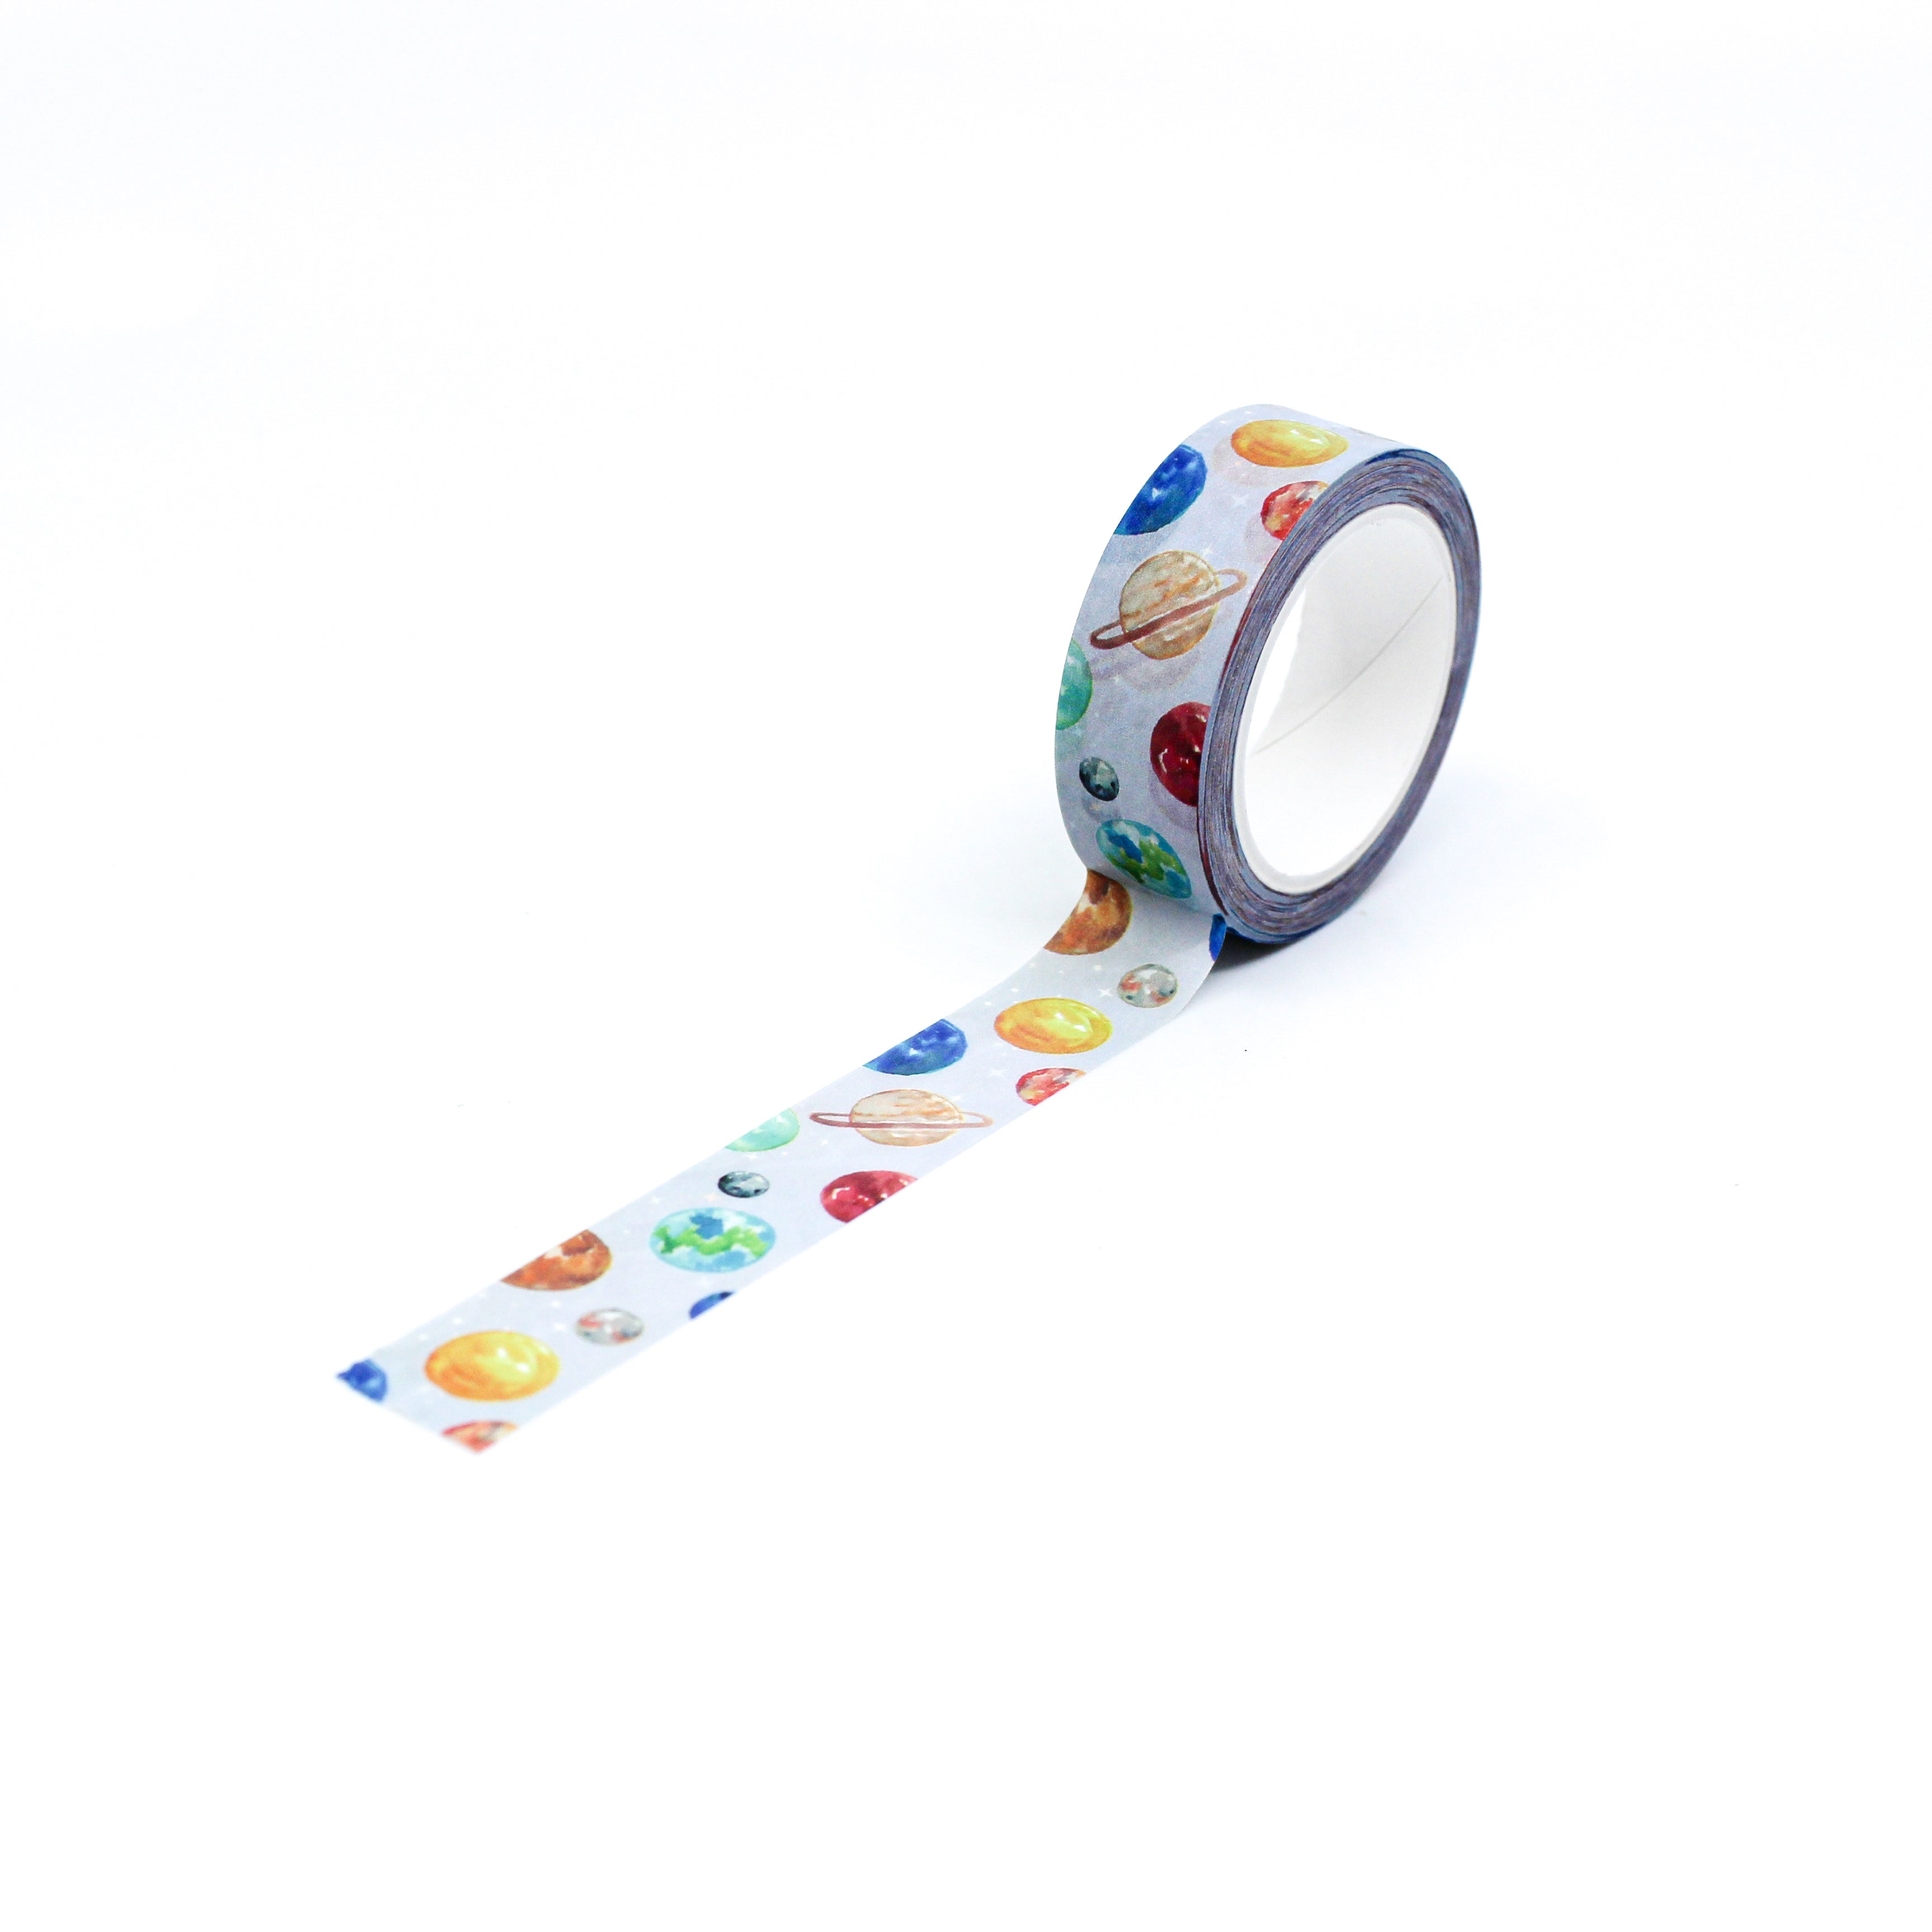 This is a full pattern repeat view of science and outer space planet washi tape from BBB Supplies Craft Shop